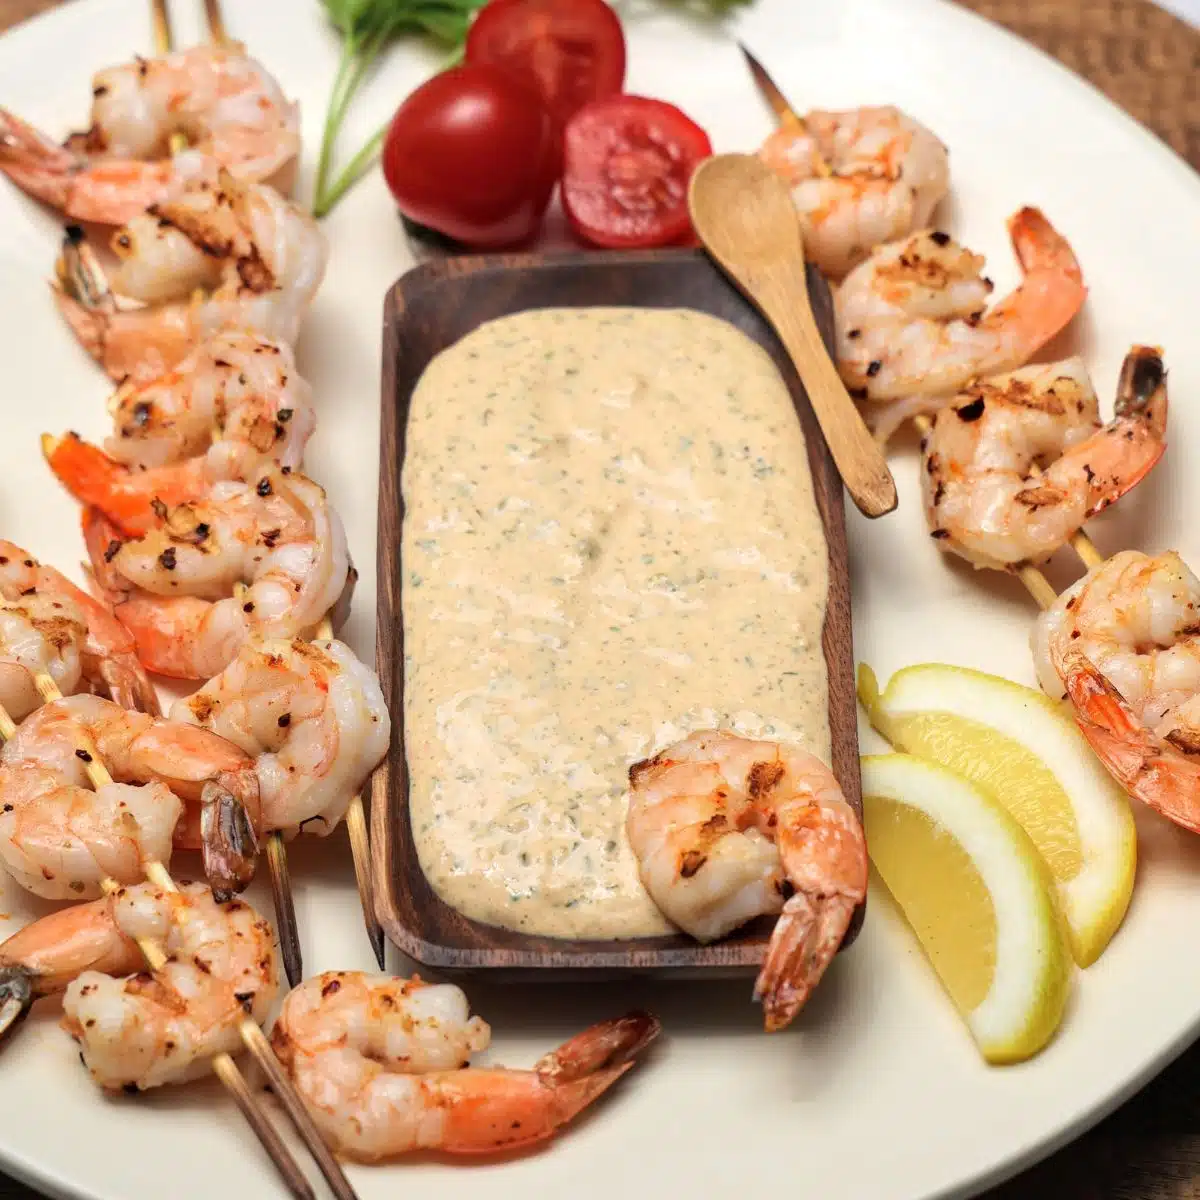 Platter with grilled shrimp on skewers with wooden bowl of remoulade sauce, lemon wedges and garnished with parsley and cherry tomatoes.